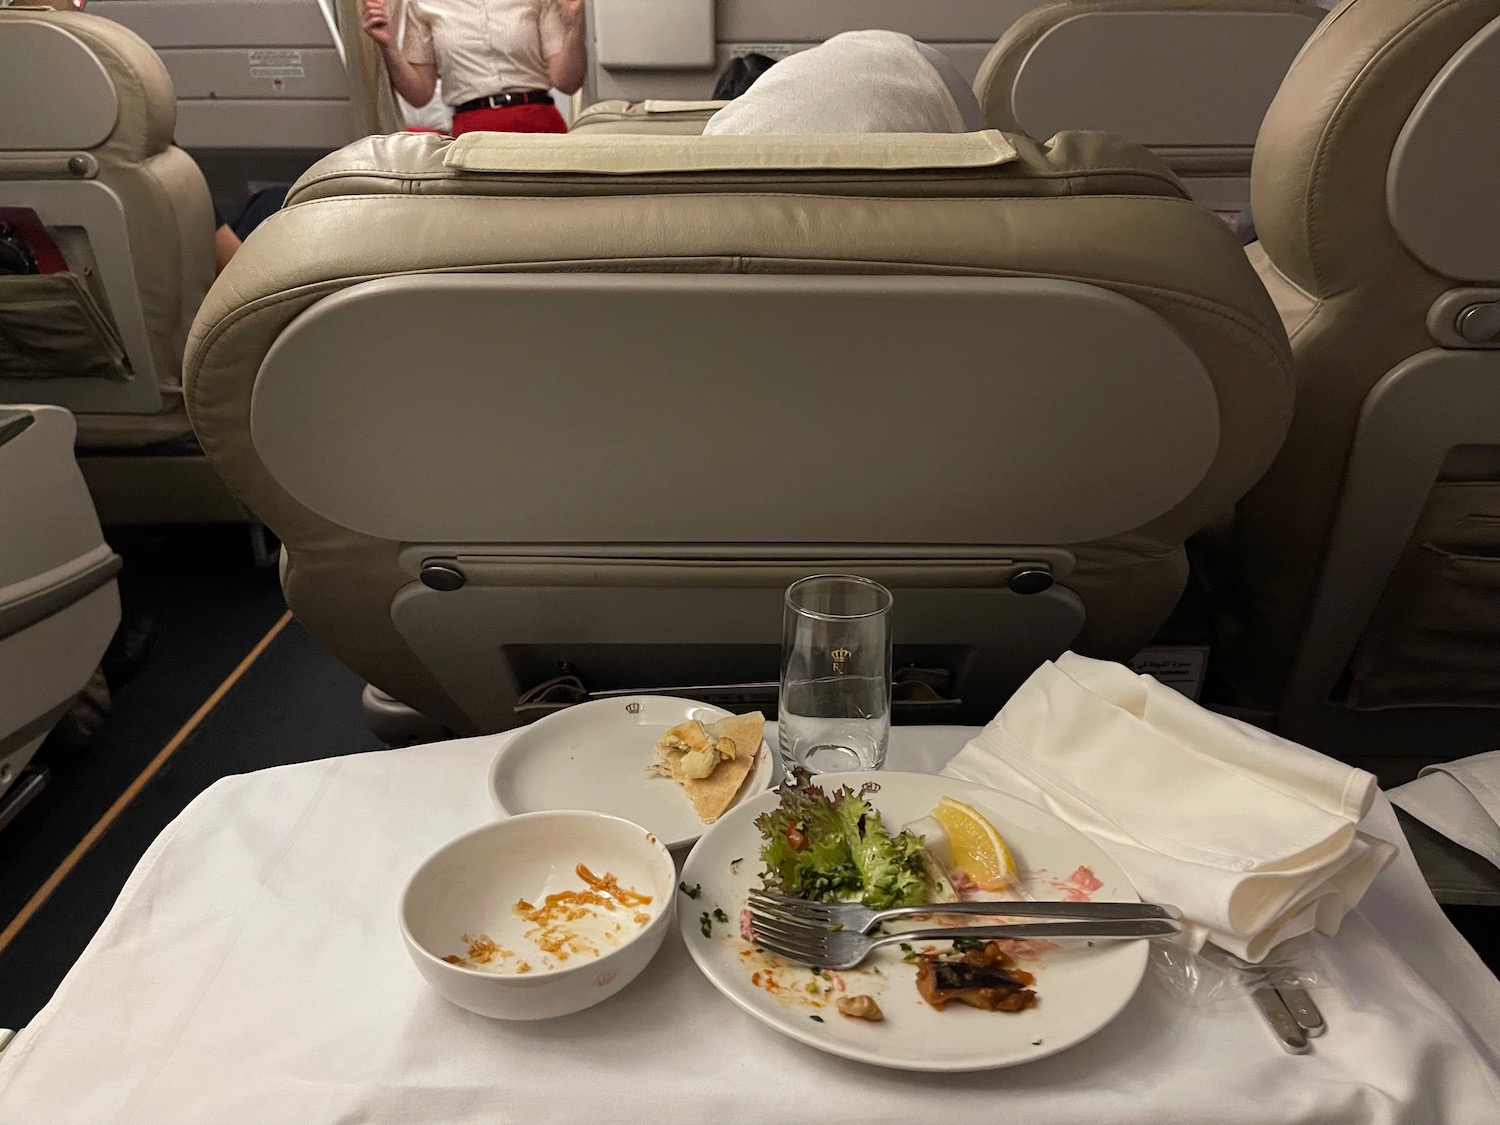 a plate of food on a table in an airplane